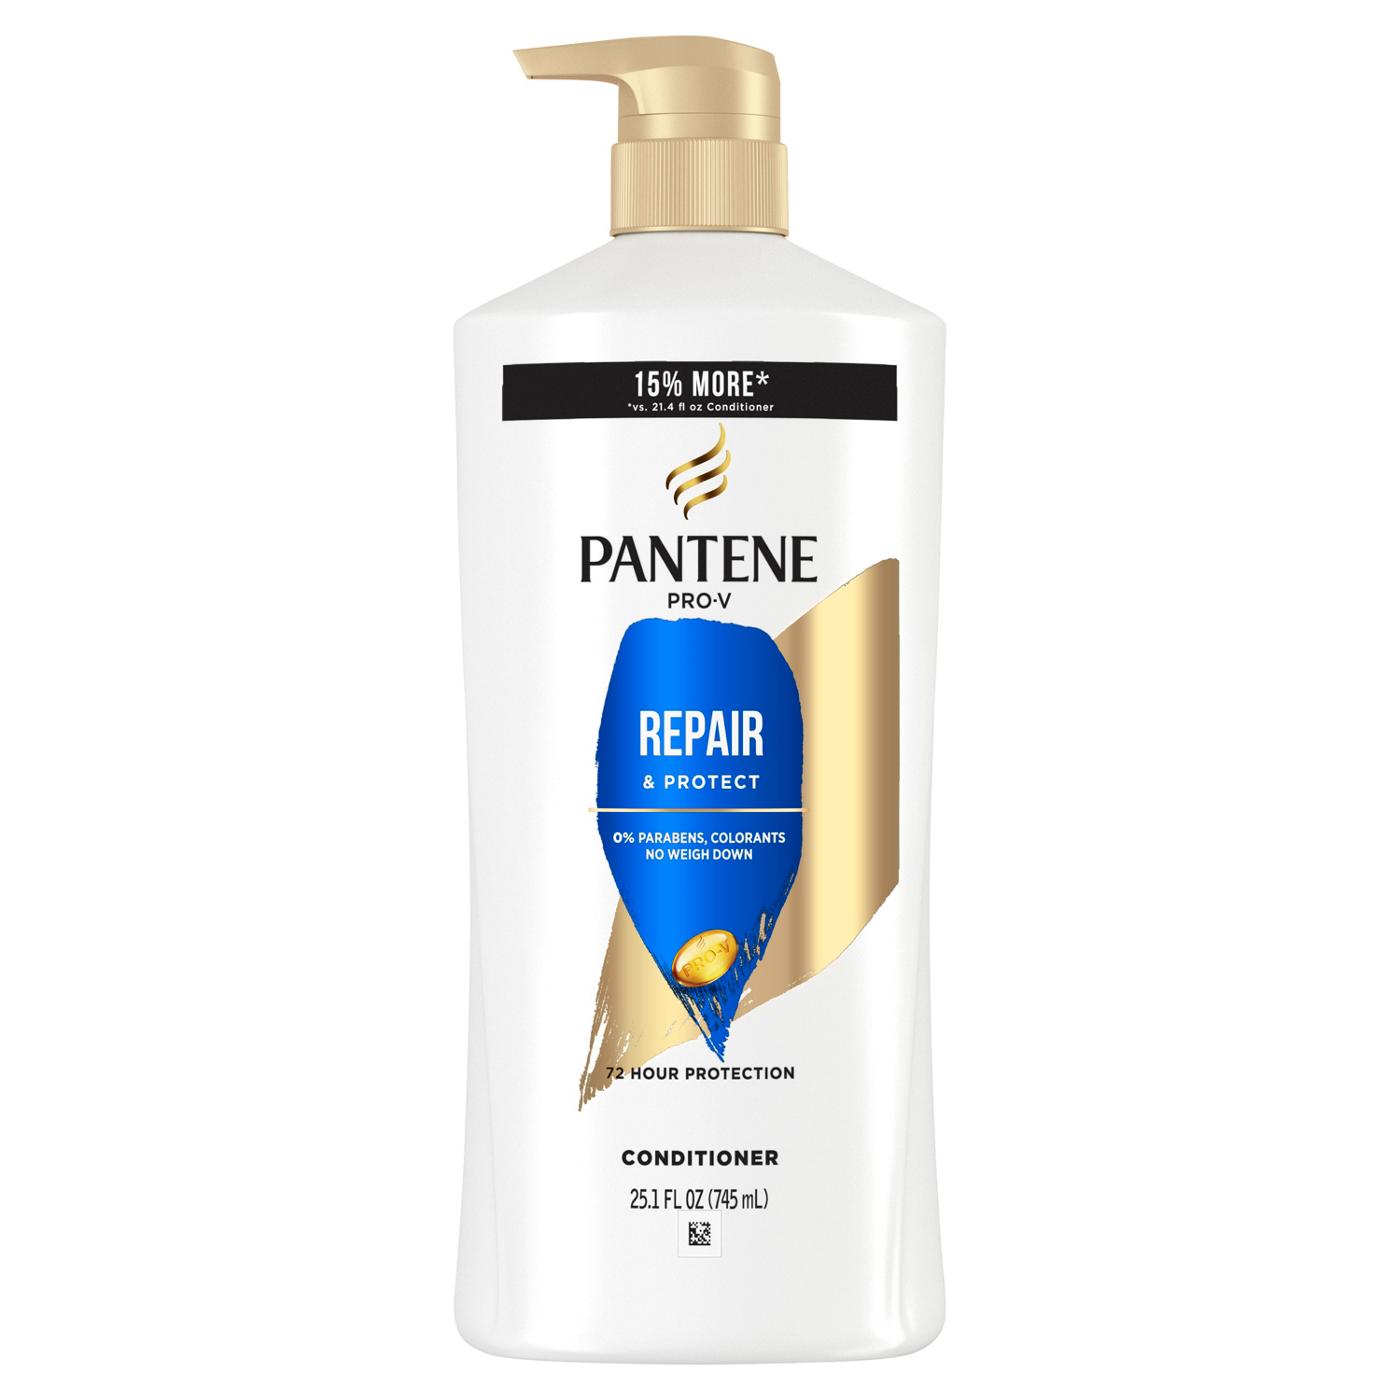 Pantene PRO-V Repair & Protect Conditioner; image 1 of 9